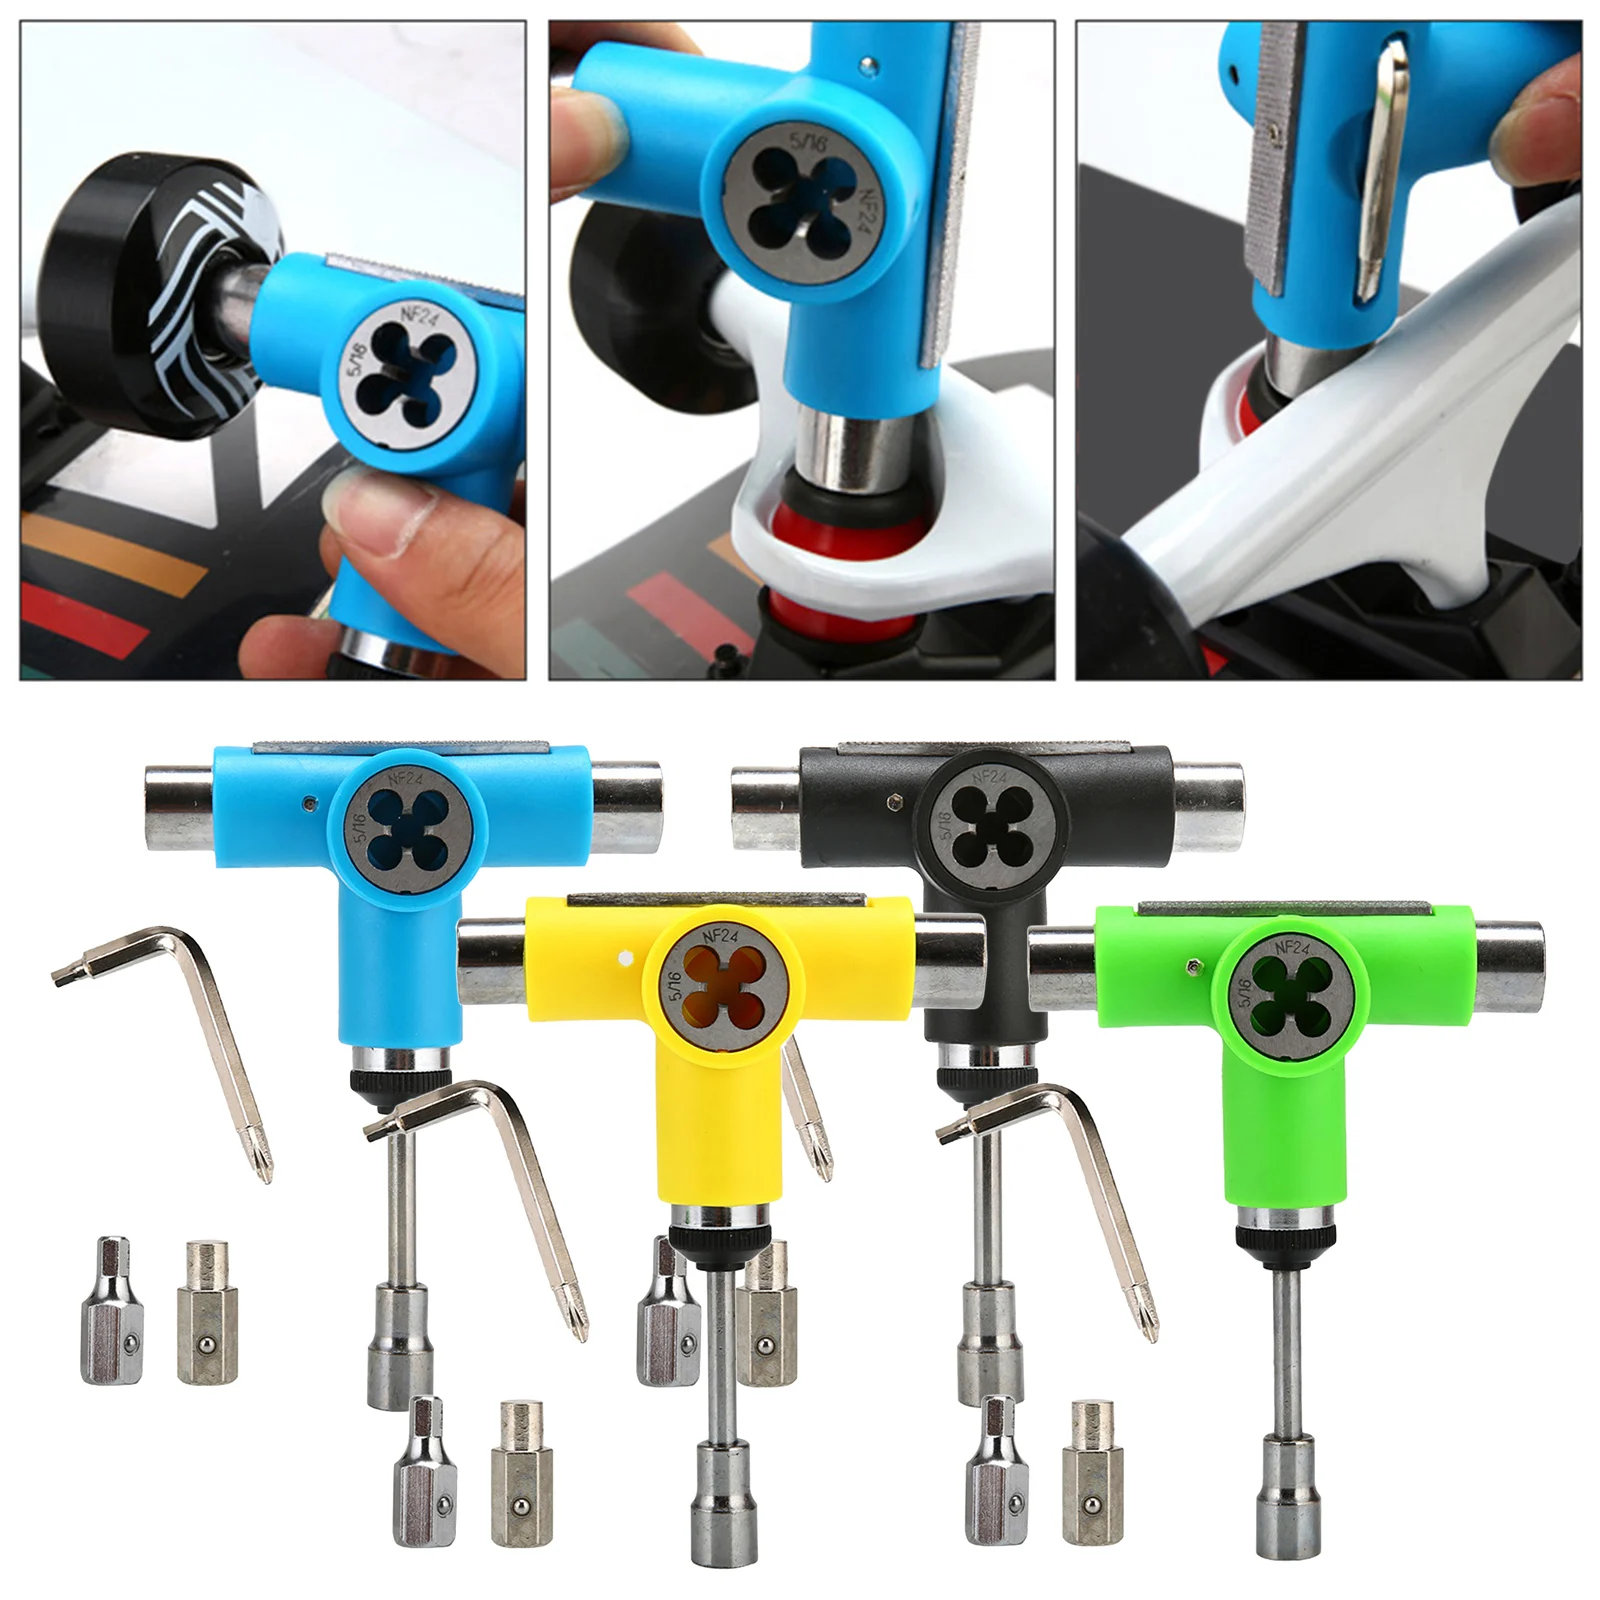 

All-in-One Skate Tool Multi-Function Portable Skateboard T Tool Accessory with Allen Key L-Type Phillips Head Wrench Screwdriver